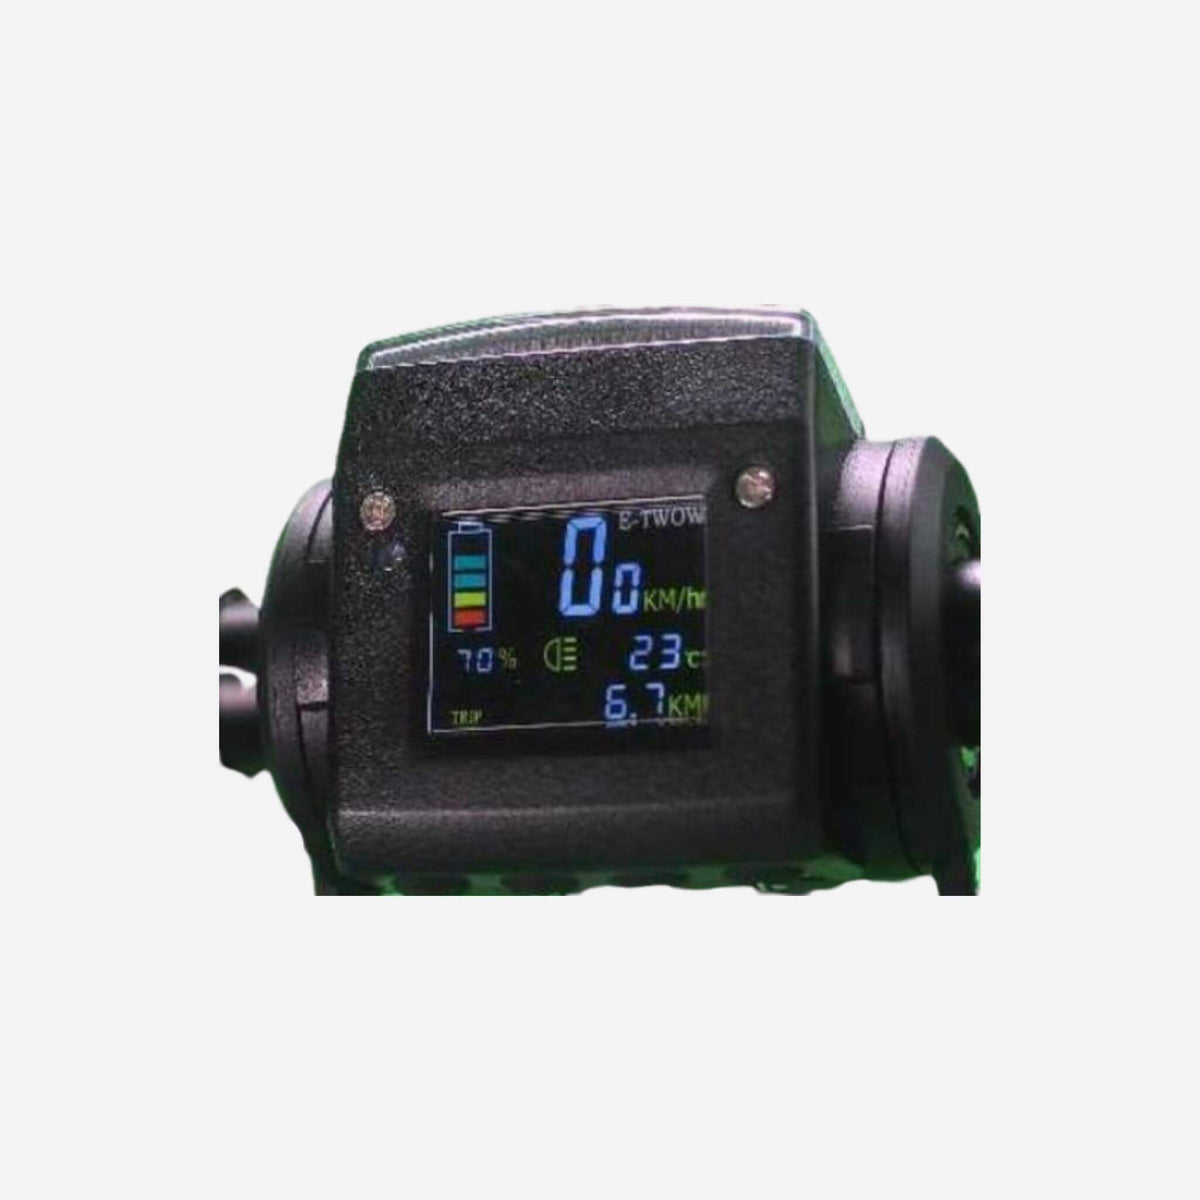 Display LCD para E-Twow GT - Ecosmart Riders